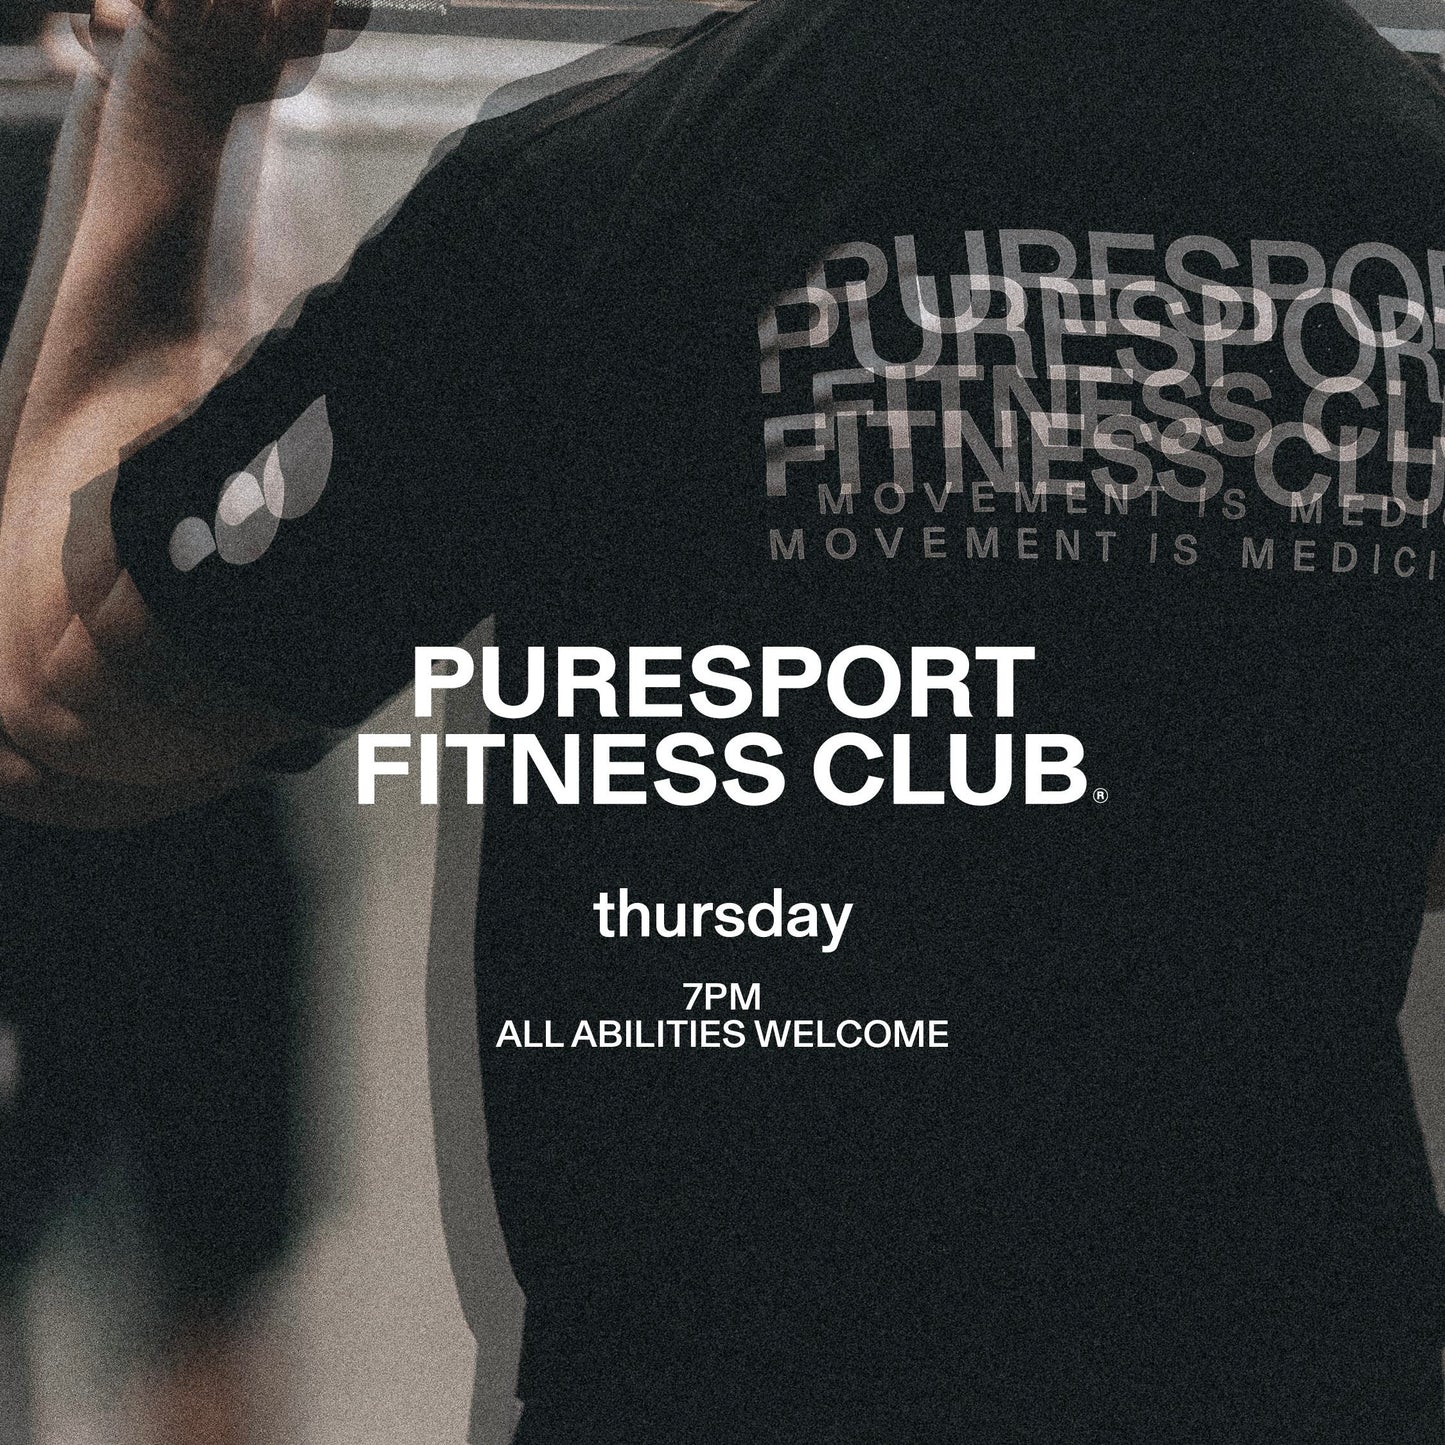 Puresport Fitness Club - SLEVEN